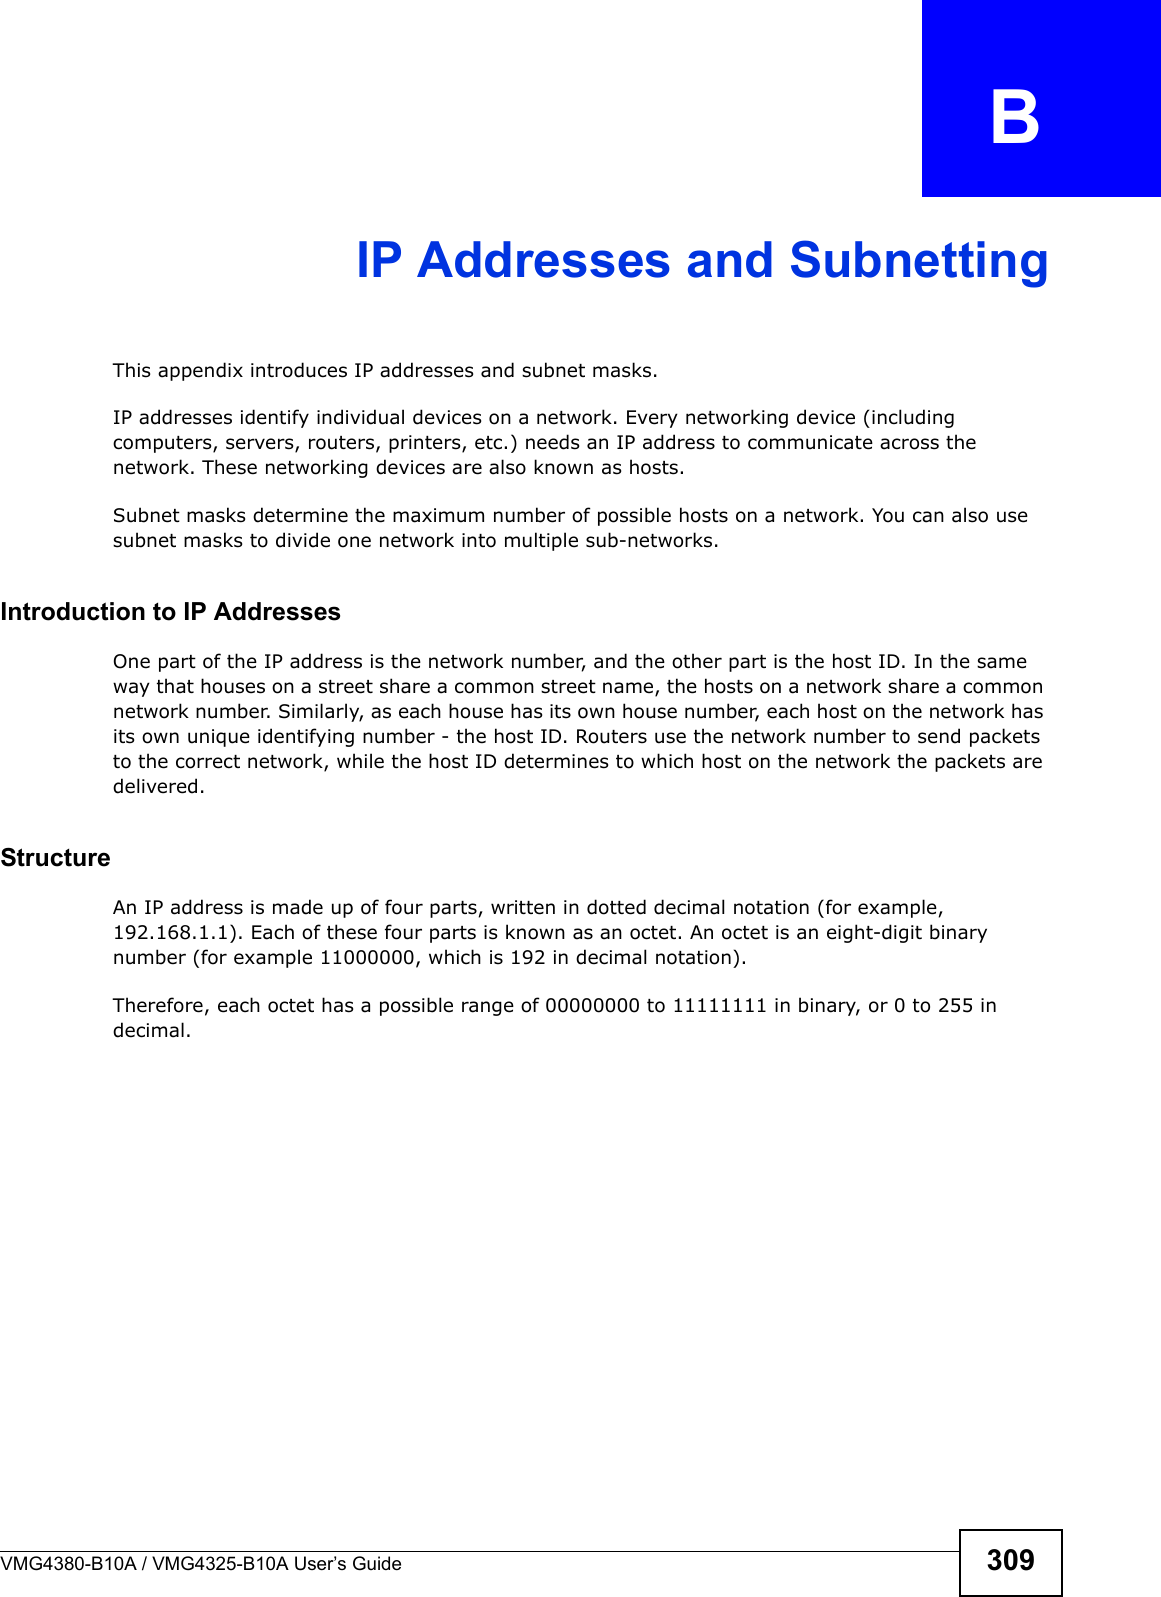 VMG4380-B10A / VMG4325-B10A User’s Guide 309APPENDIX  BIP Addresses and SubnettingThis appendix introduces IP addresses and subnet masks. IP addresses identify individual devices on a network. Every networking device (including computers, servers, routers, printers, etc.) needs an IP address to communicate across thenetwork. These networking devices are also known as hosts.Subnet masks determine the maximum number of possible hosts on a network. You can also use subnet masks to divide one network into multiple sub-networks.Introduction to IP AddressesOne part of the IP address is the network number, and the other part is the host ID. In the same way that houses on a street share a common street name, the hosts on a network share a common network number. Similarly, as each house has its own house number, each host on the network has its own unique identifying number - the host ID. Routers use the network number to send packets to the correct network, while the host ID determines to which host on the network the packets are delivered.StructureAn IP address is made up of four parts, written in dotted decimal notation (for example, 192.168.1.1). Each of these four parts is known as an octet. An octet is an eight-digit binary number (for example 11000000, which is 192 in decimal notation).Therefore, each octet has a possible range of 00000000 to 11111111 in binary, or 0 to 255 in decimal.